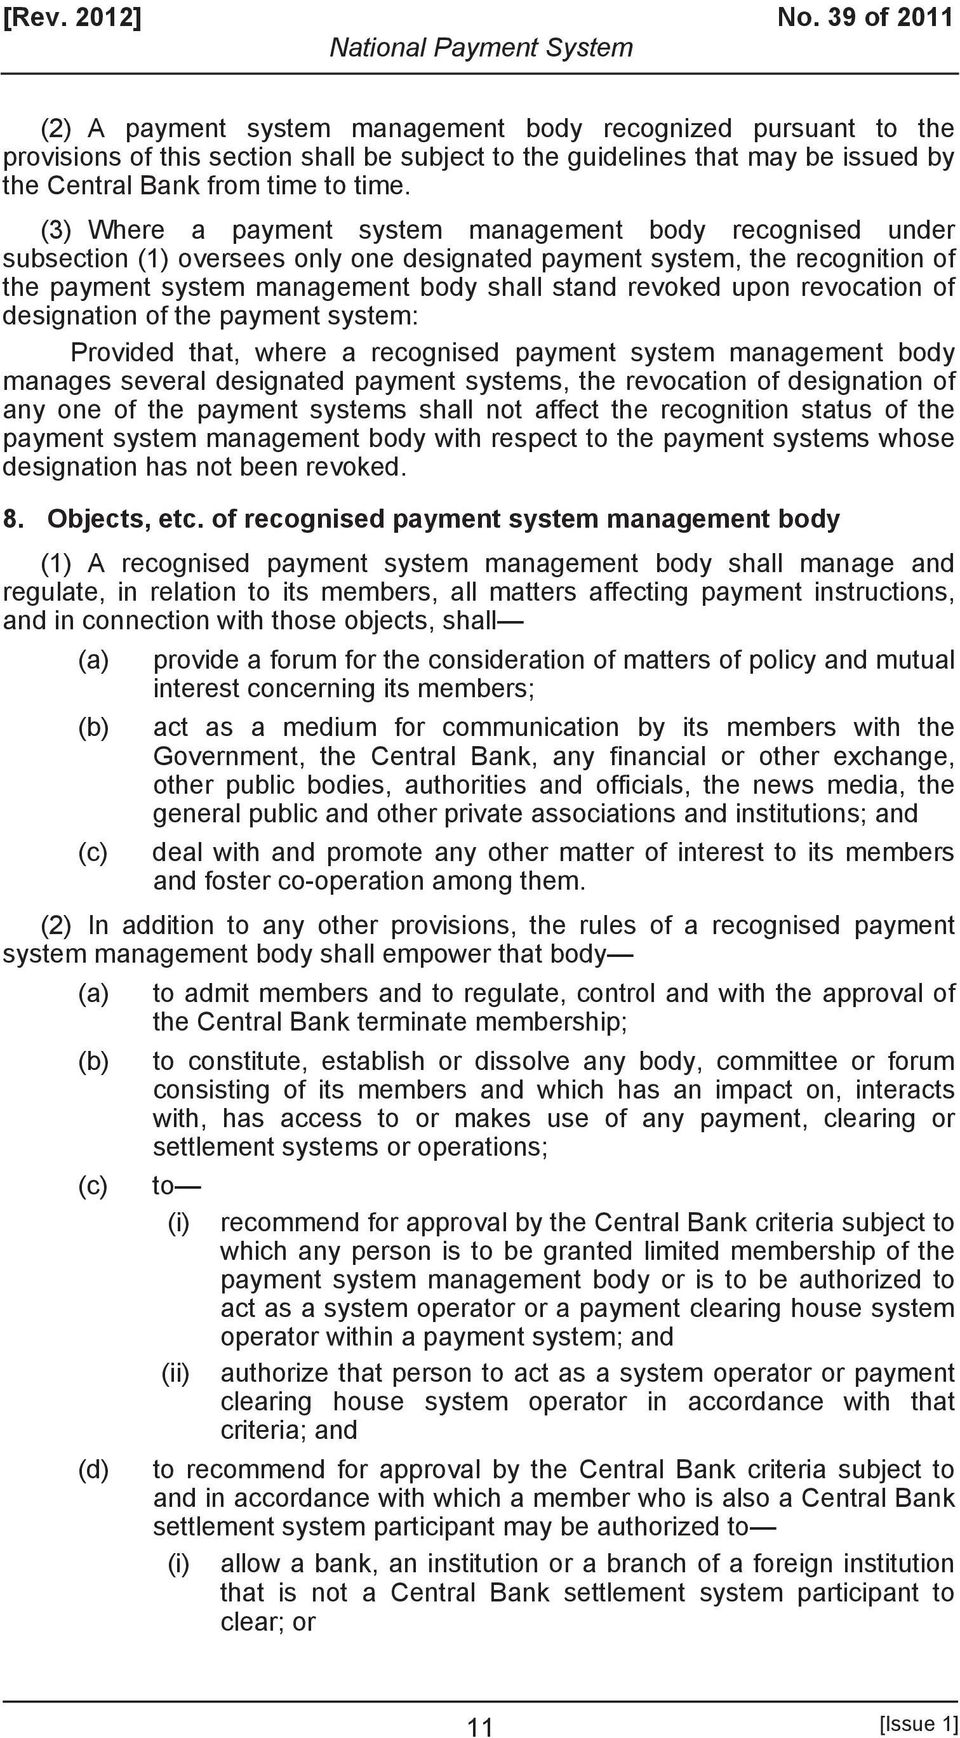 (3) Where a payment system management body recognised under subsection (1) oversees only one designated payment system, the recognition of the payment system management body shall stand revoked upon